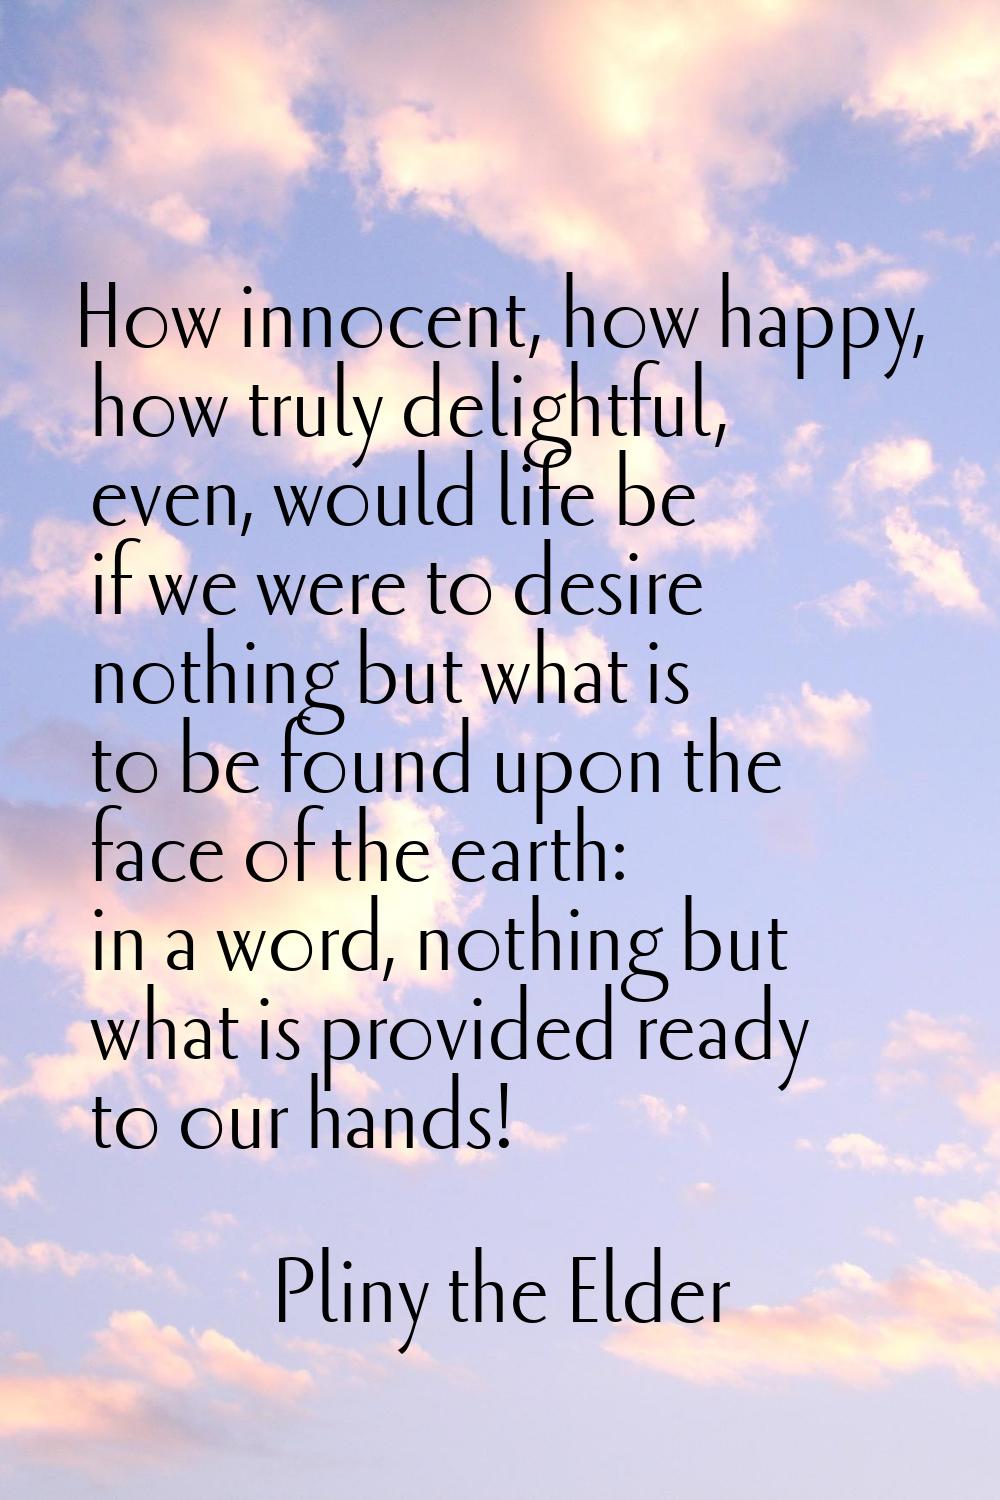 How innocent, how happy, how truly delightful, even, would life be if we were to desire nothing but